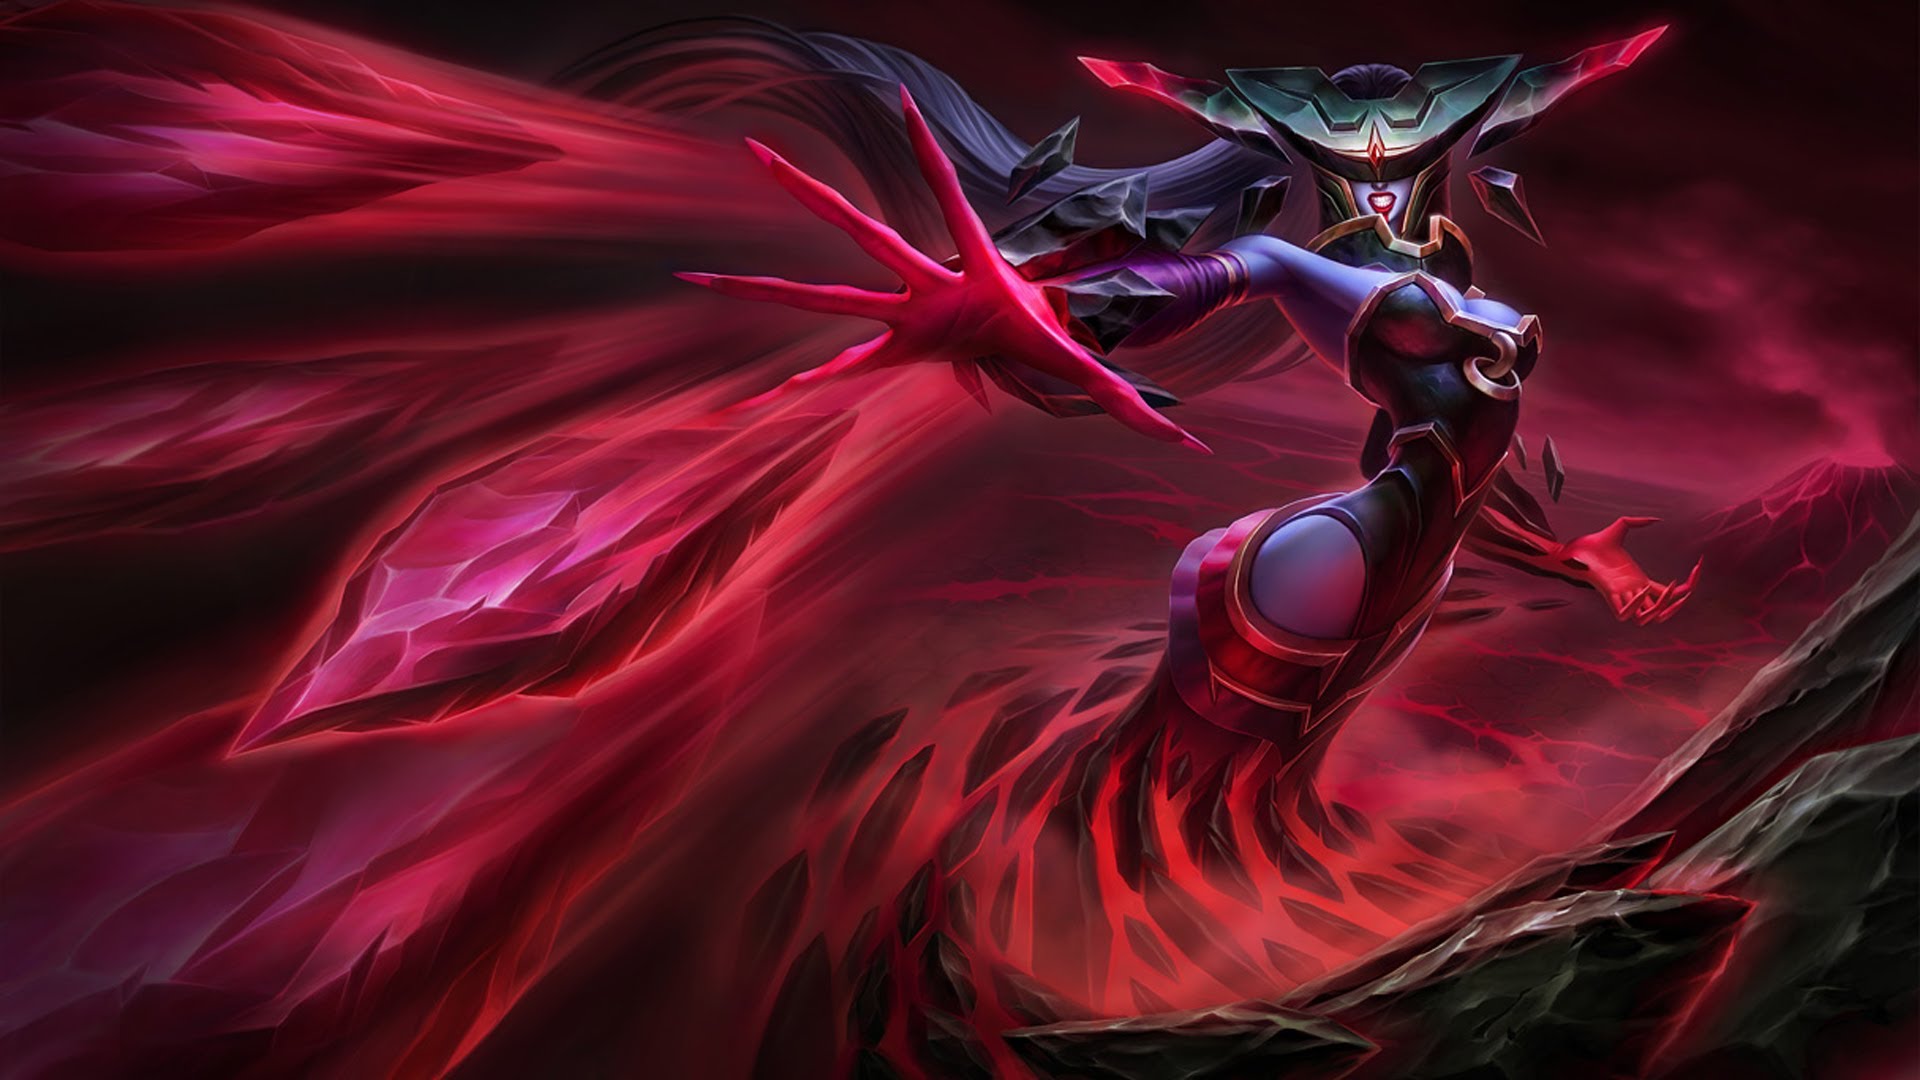 League Of Legends Lissandra Skins Roles Mage Epithet The Ice Witch Images, Photos, Reviews